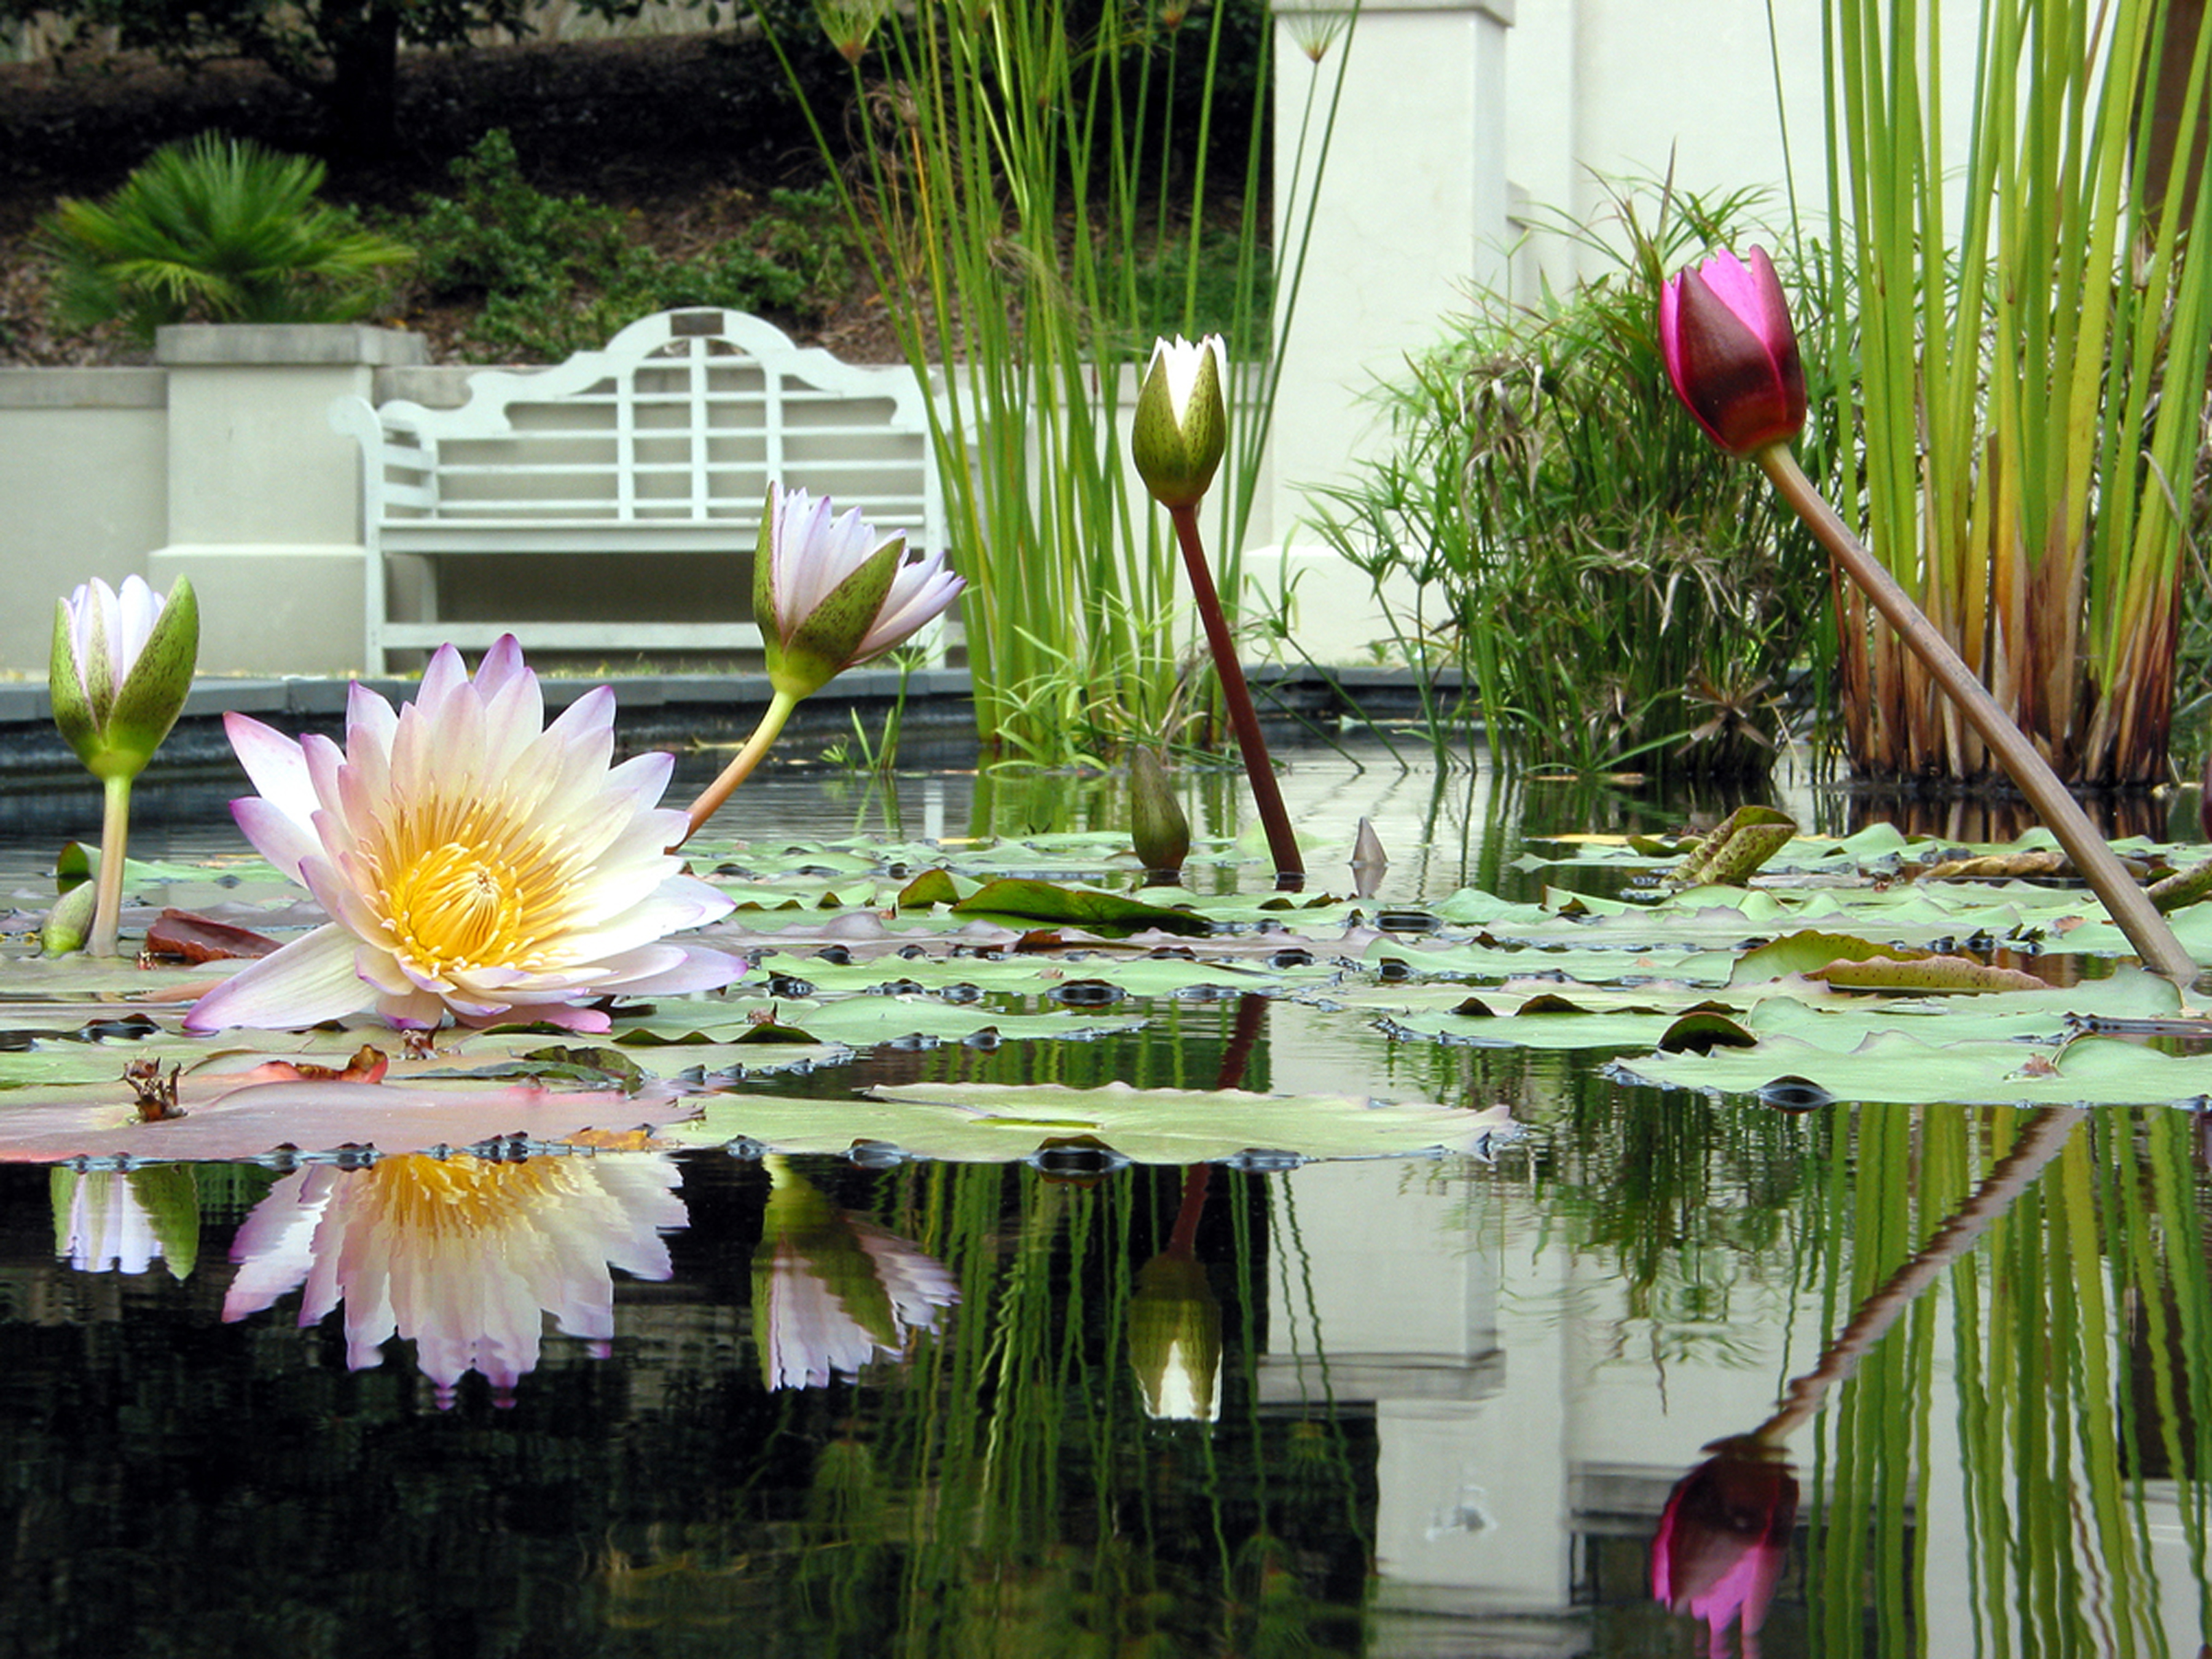 Lily pads and flowers on a still pond